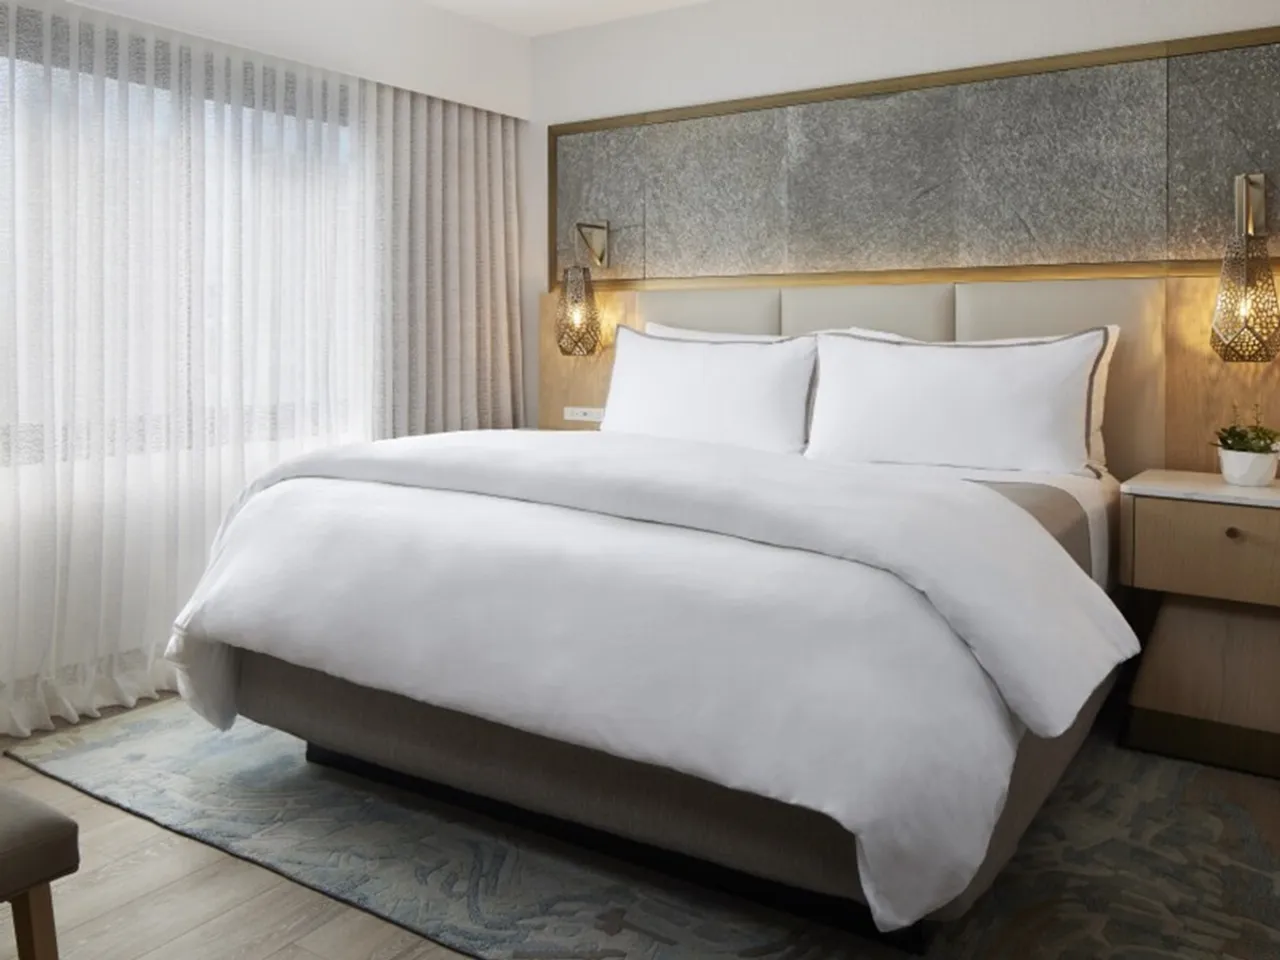 Westin Hotels & Resorts Bolsters its ‘Best in Bed’ Reputation